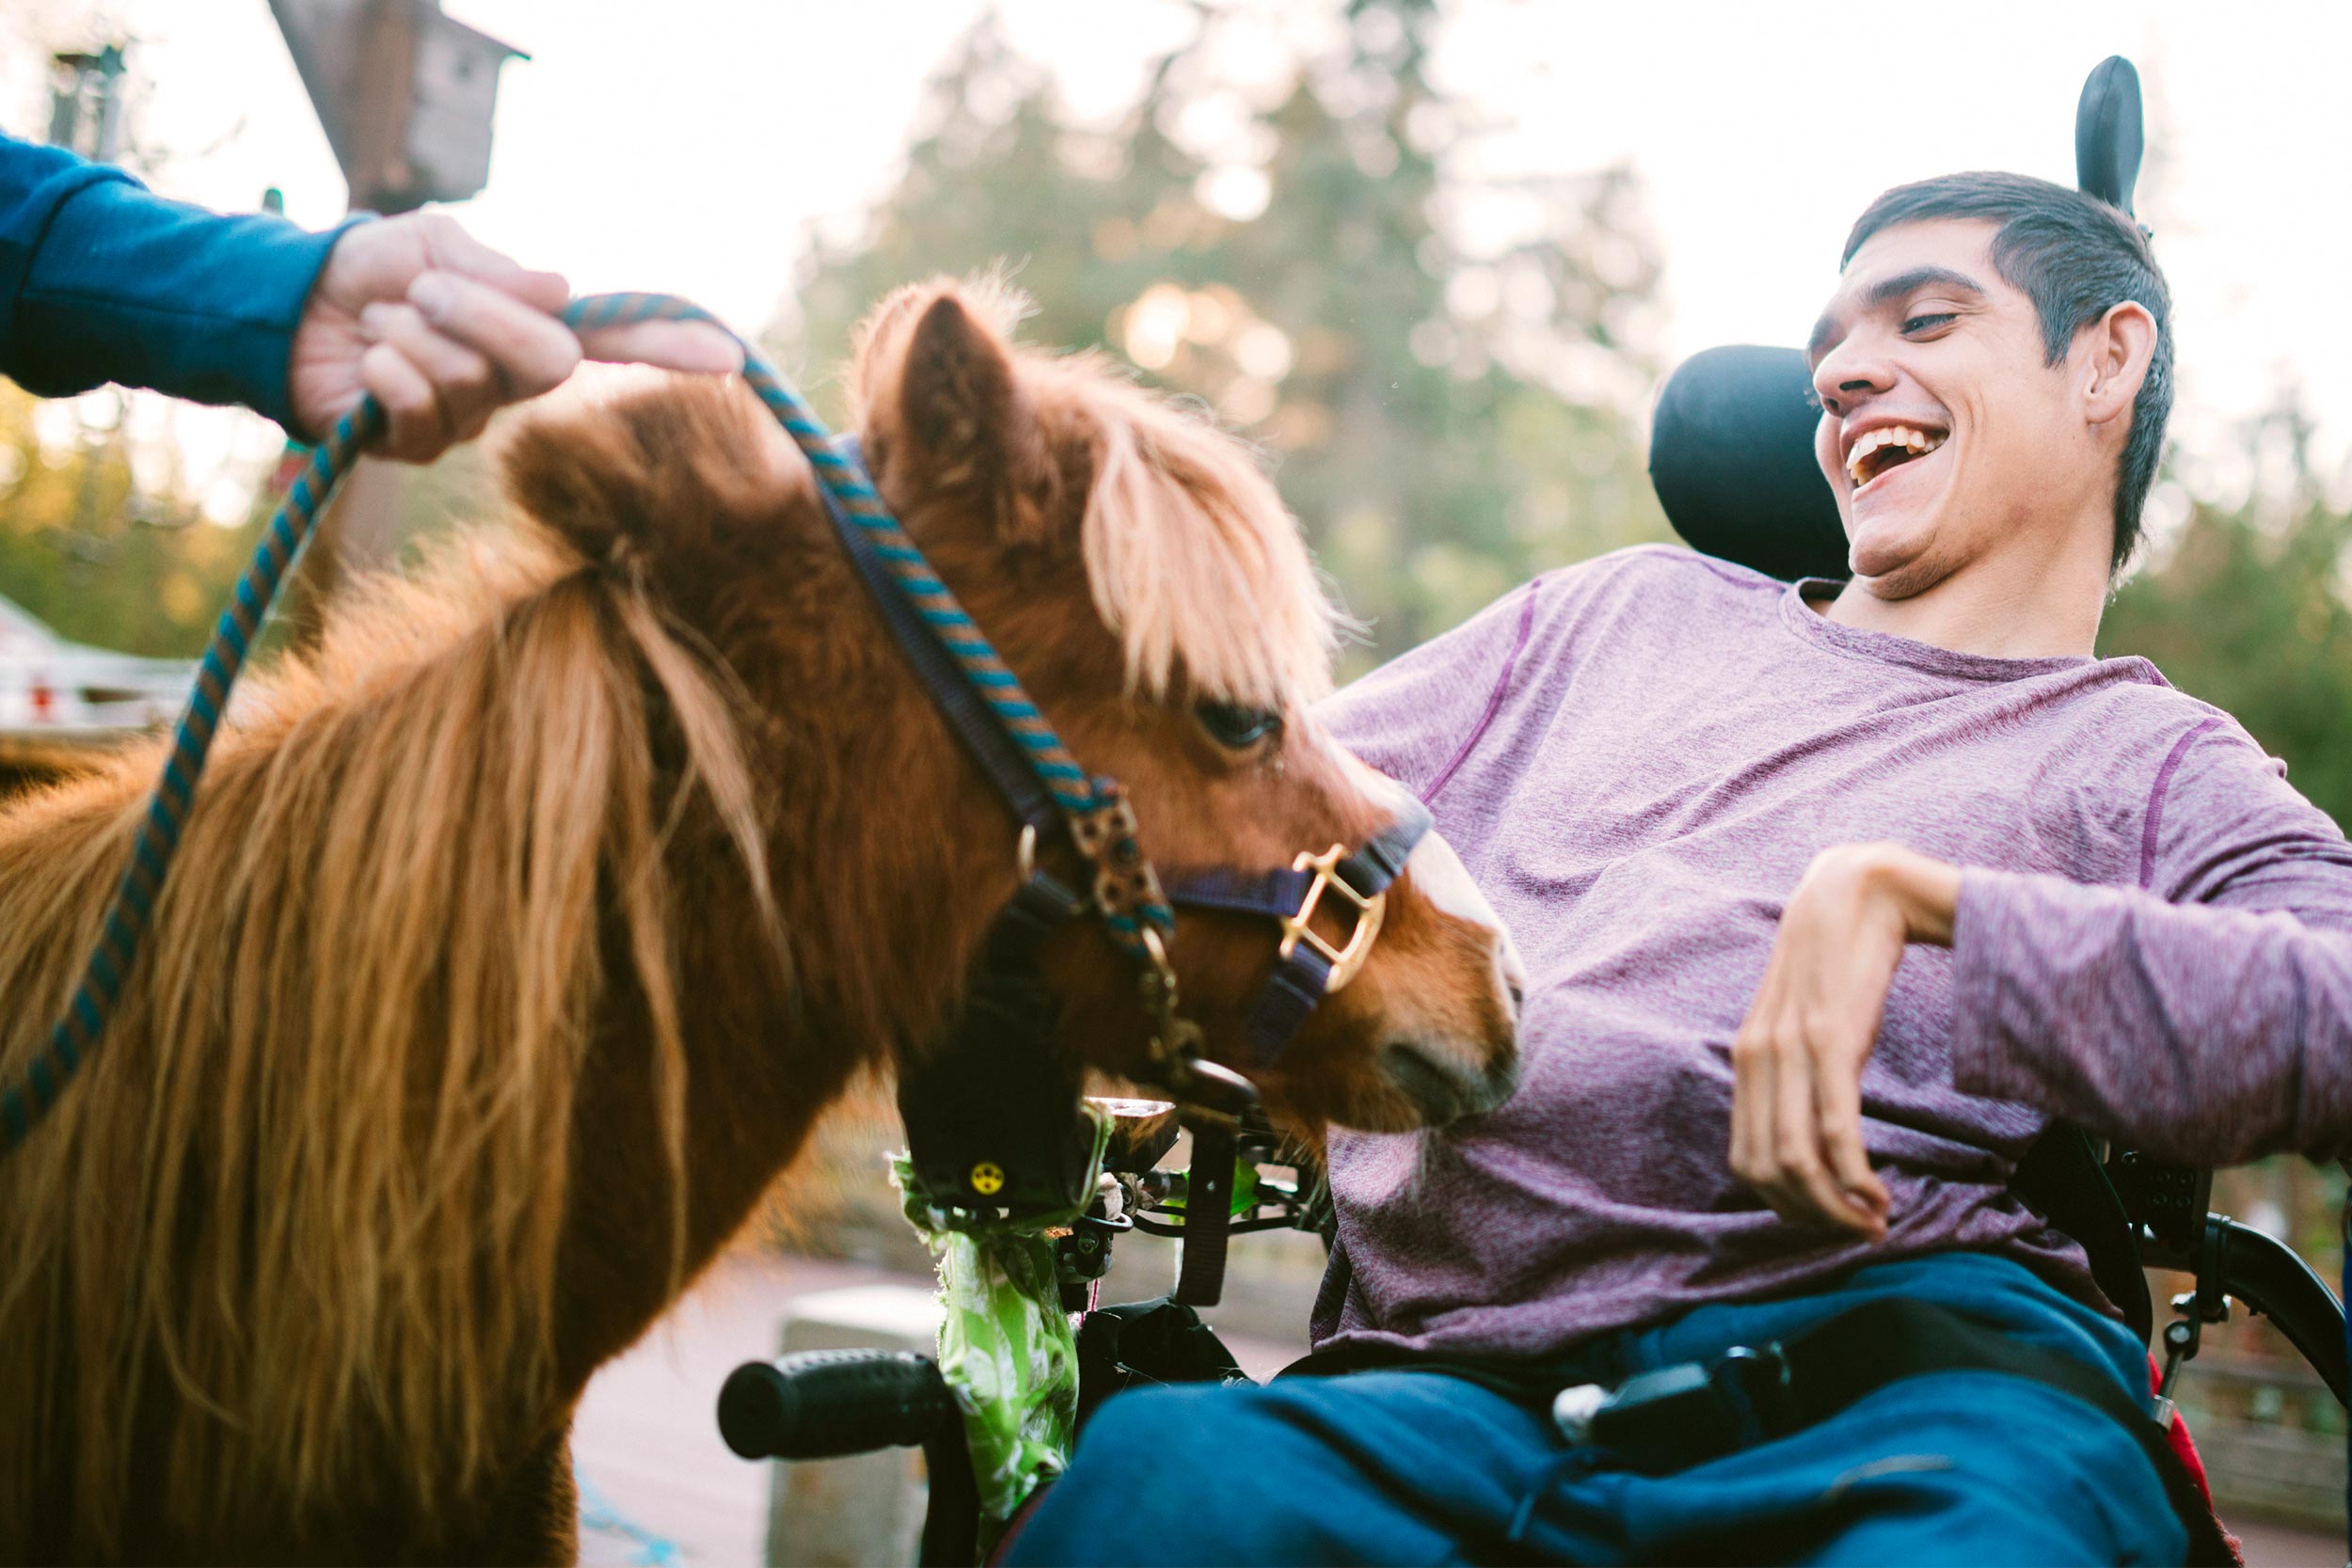 Teen boy with cerebral palsy putting a therapy horse